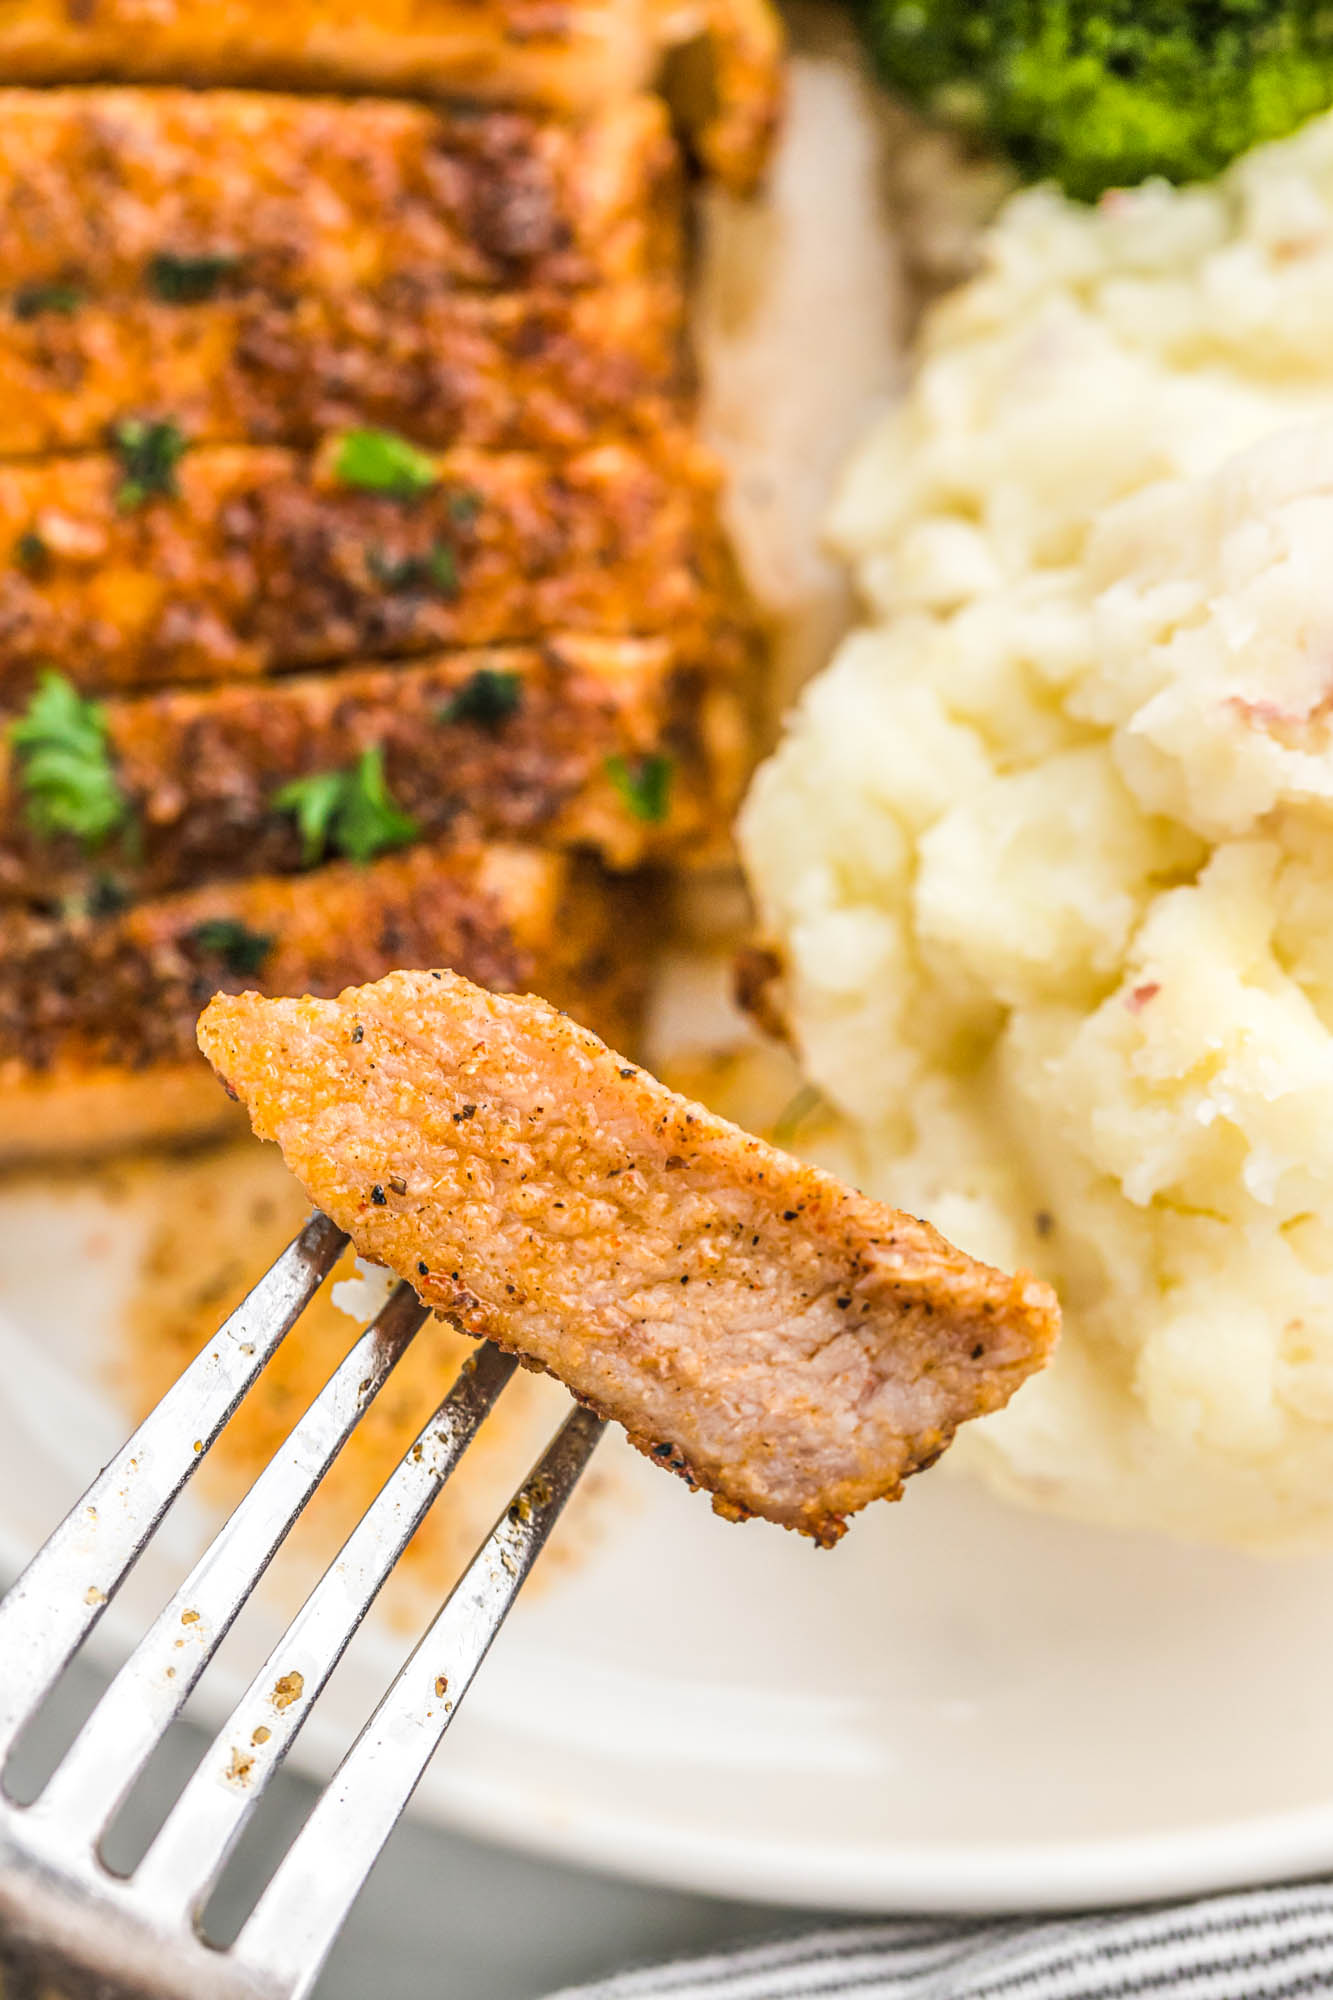 Taking a piece of baked pork chop with a fork